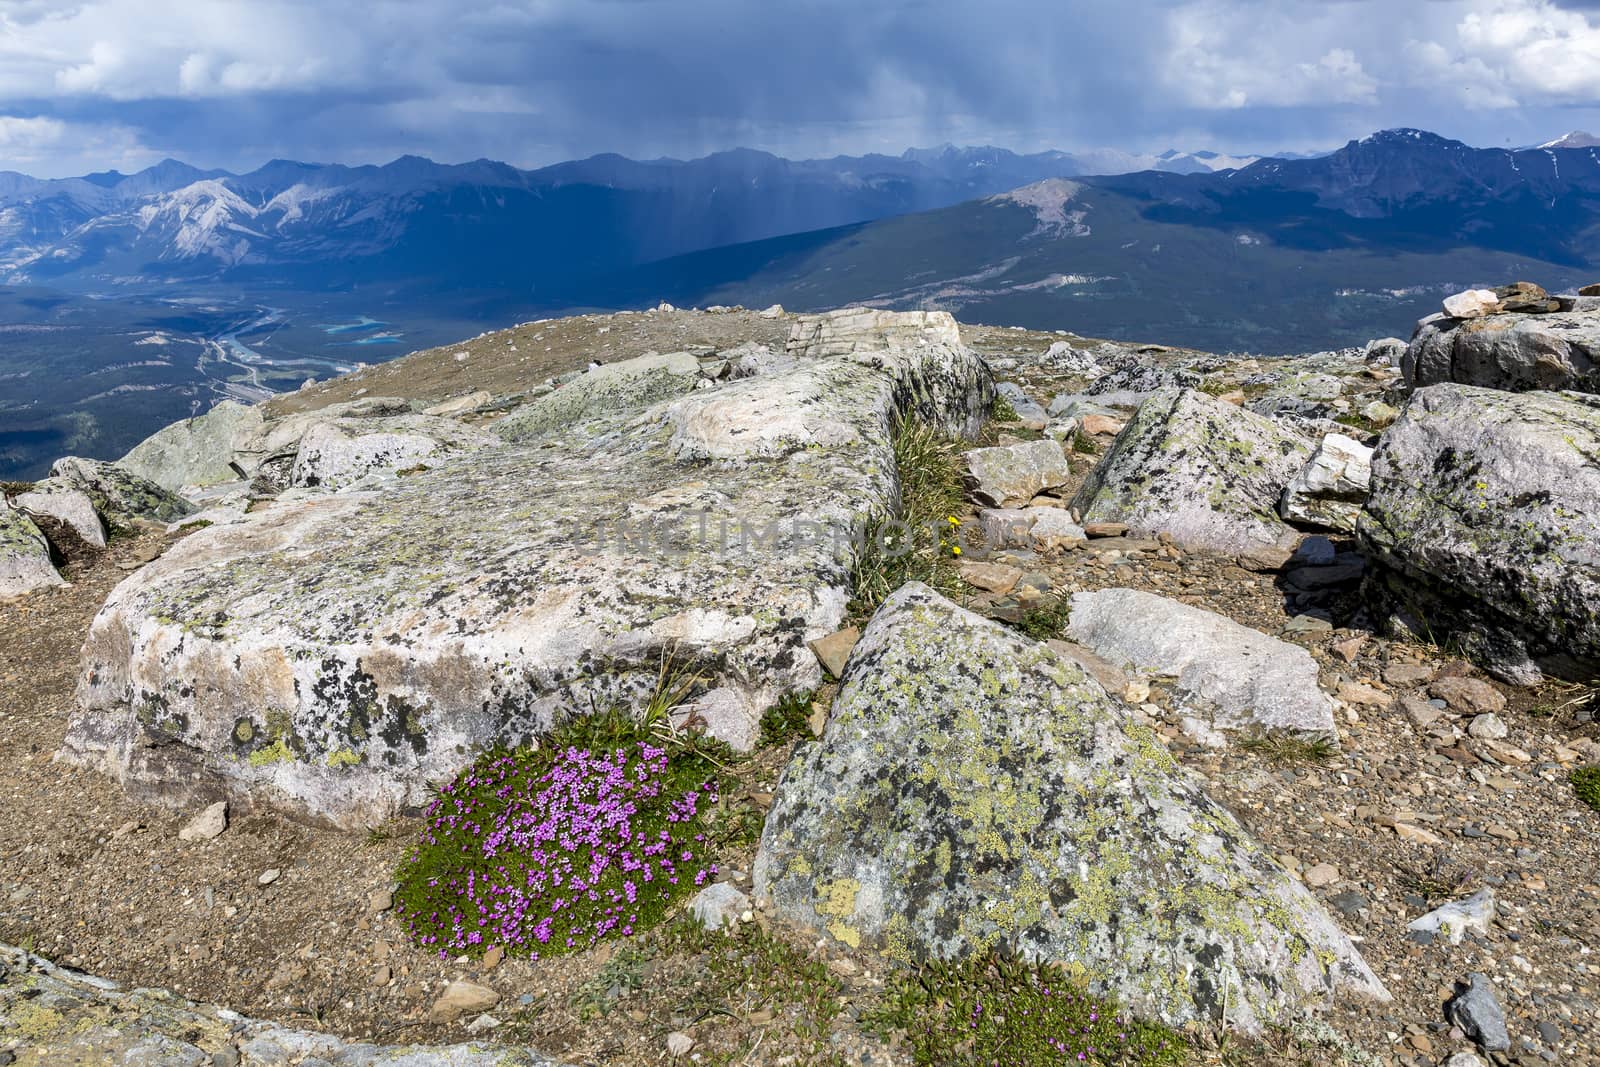 Wildflowers and lichen in an alpine meadow with a storm approaching in the background - Jasper National Park, Alberta, Canada